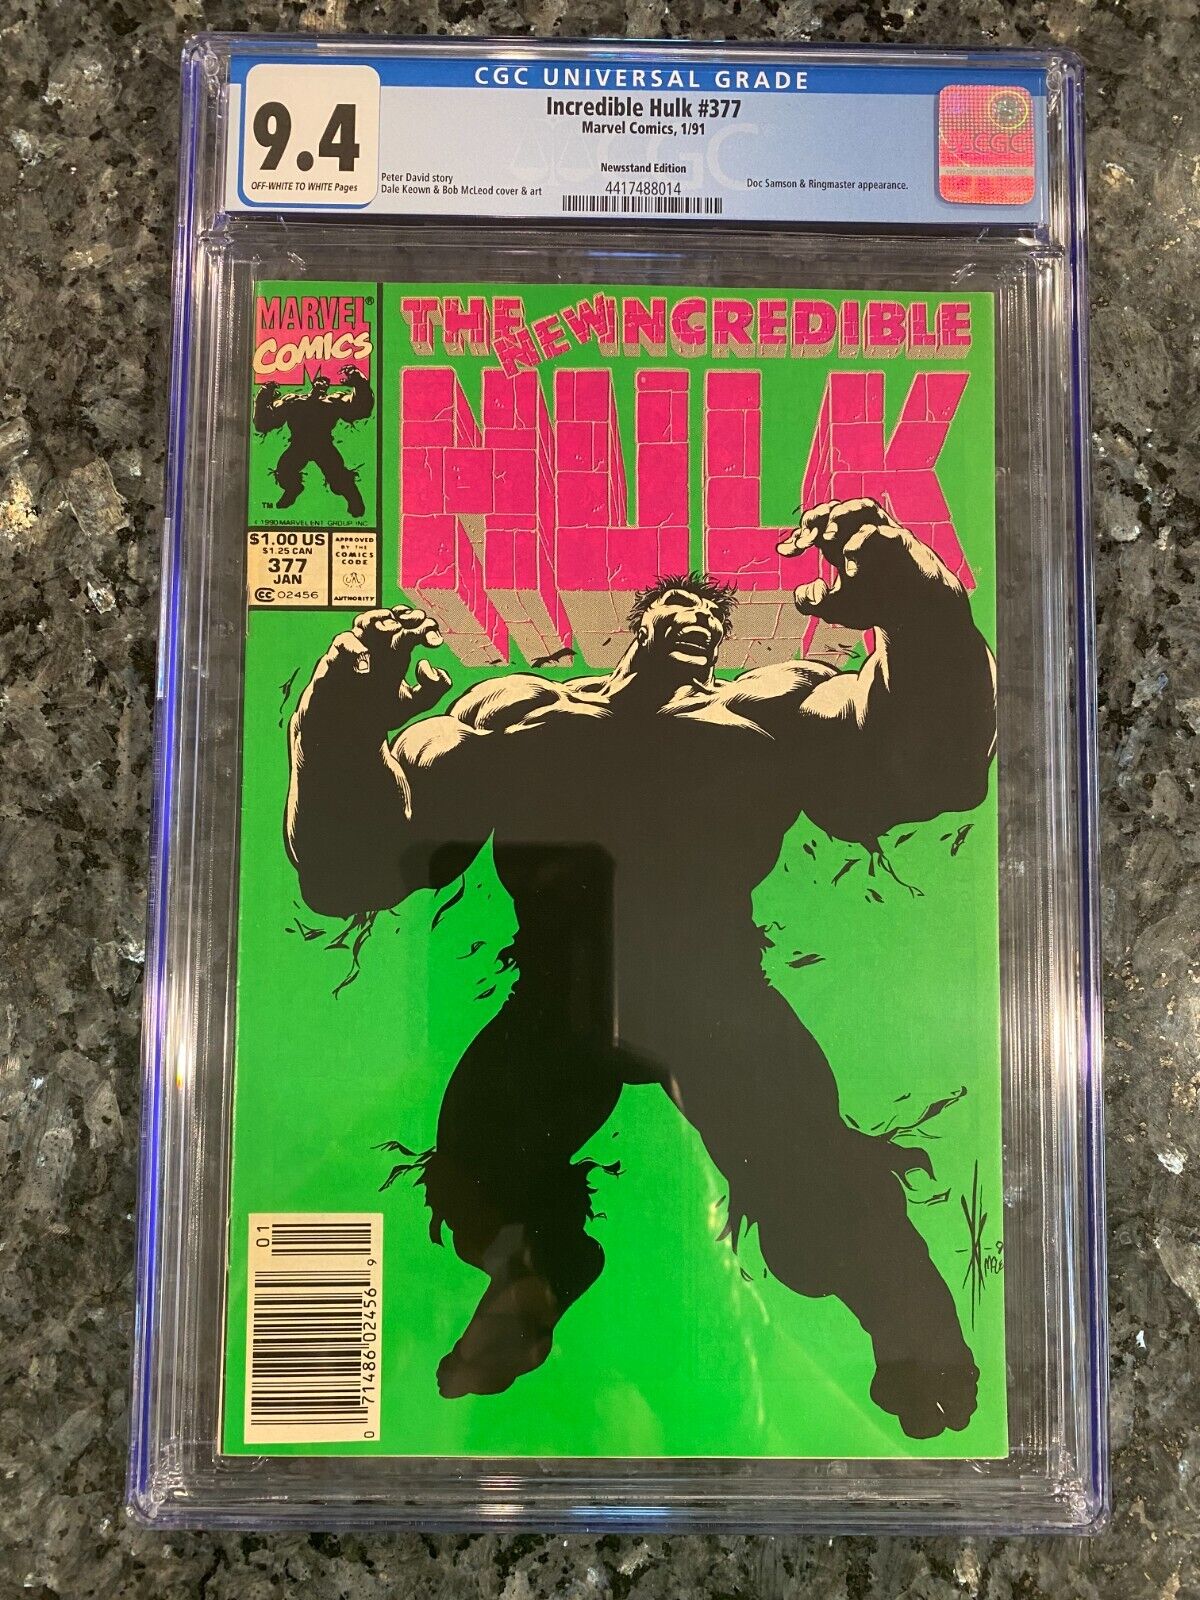 Pivotal Iconic Transformation: Incredible Hulk #377 - Newsstand Edition, CGC 9.4